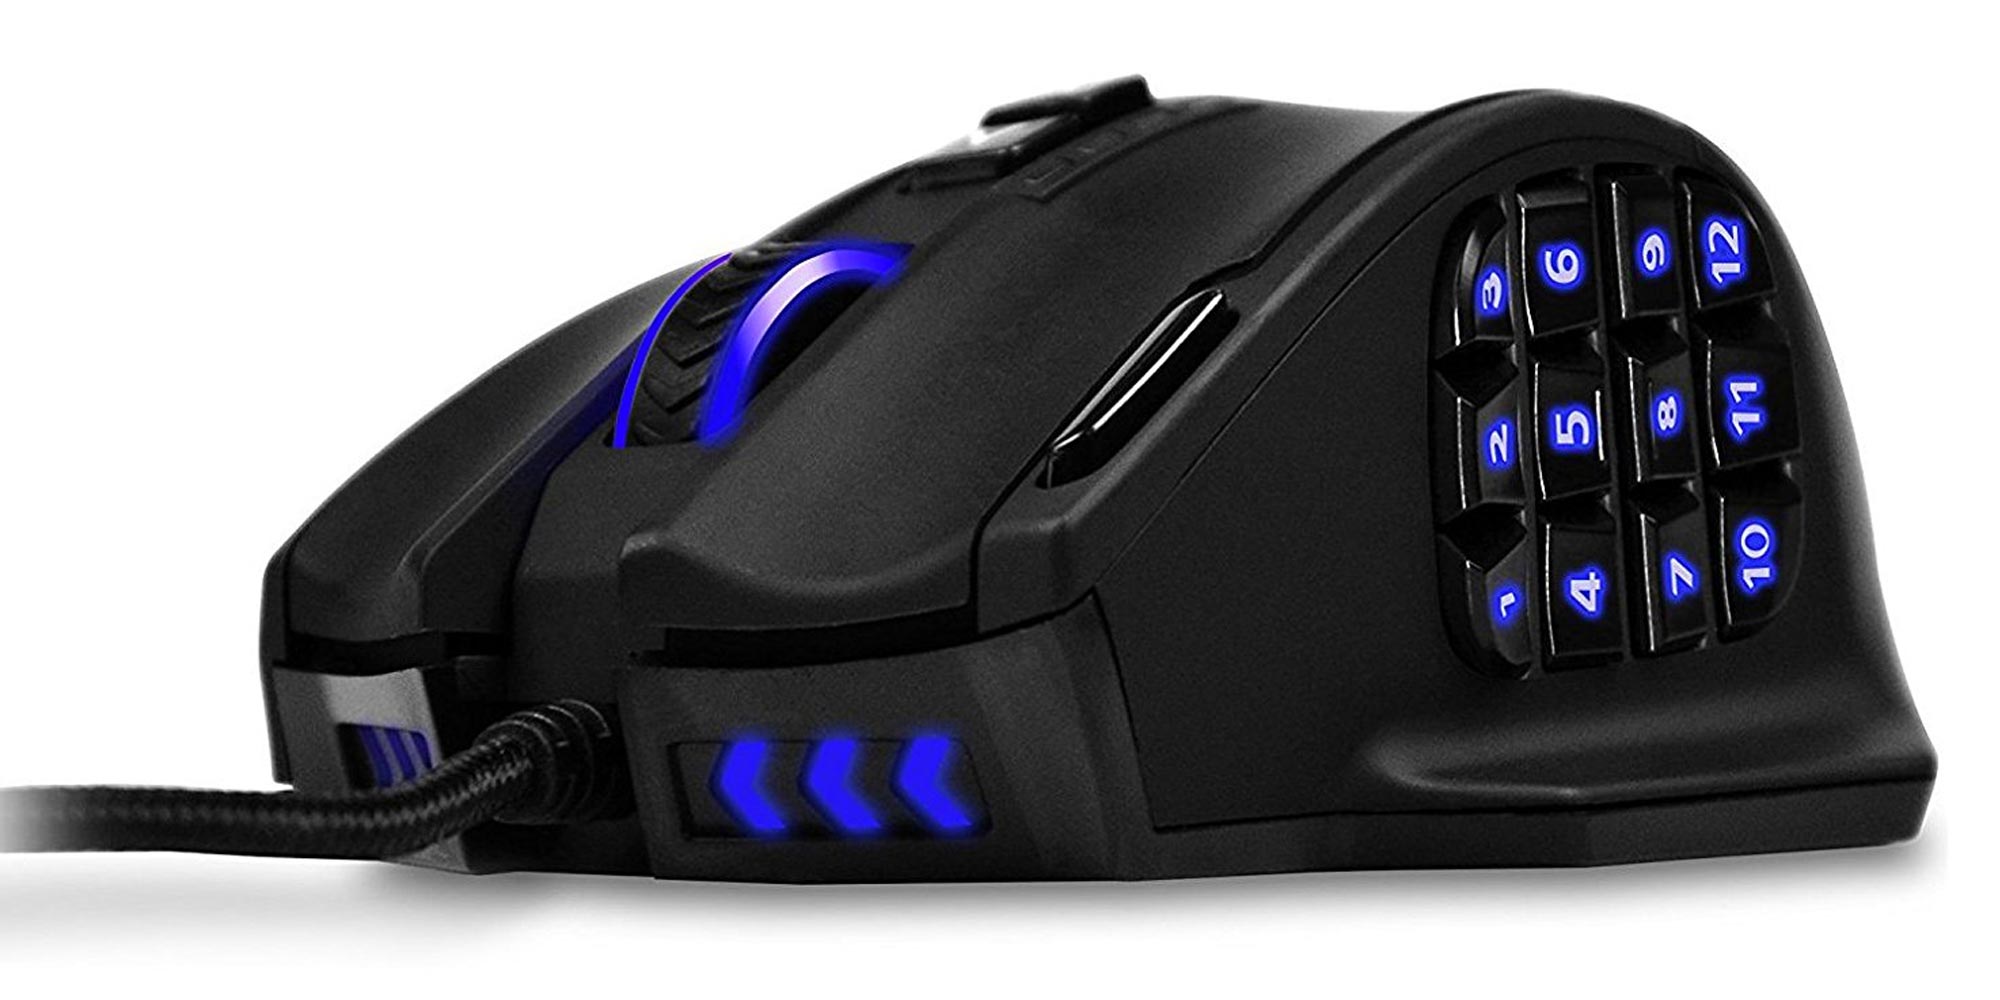 This MMOstyle gaming mouse is just 28 shipped at Amazon (Reg. 40)